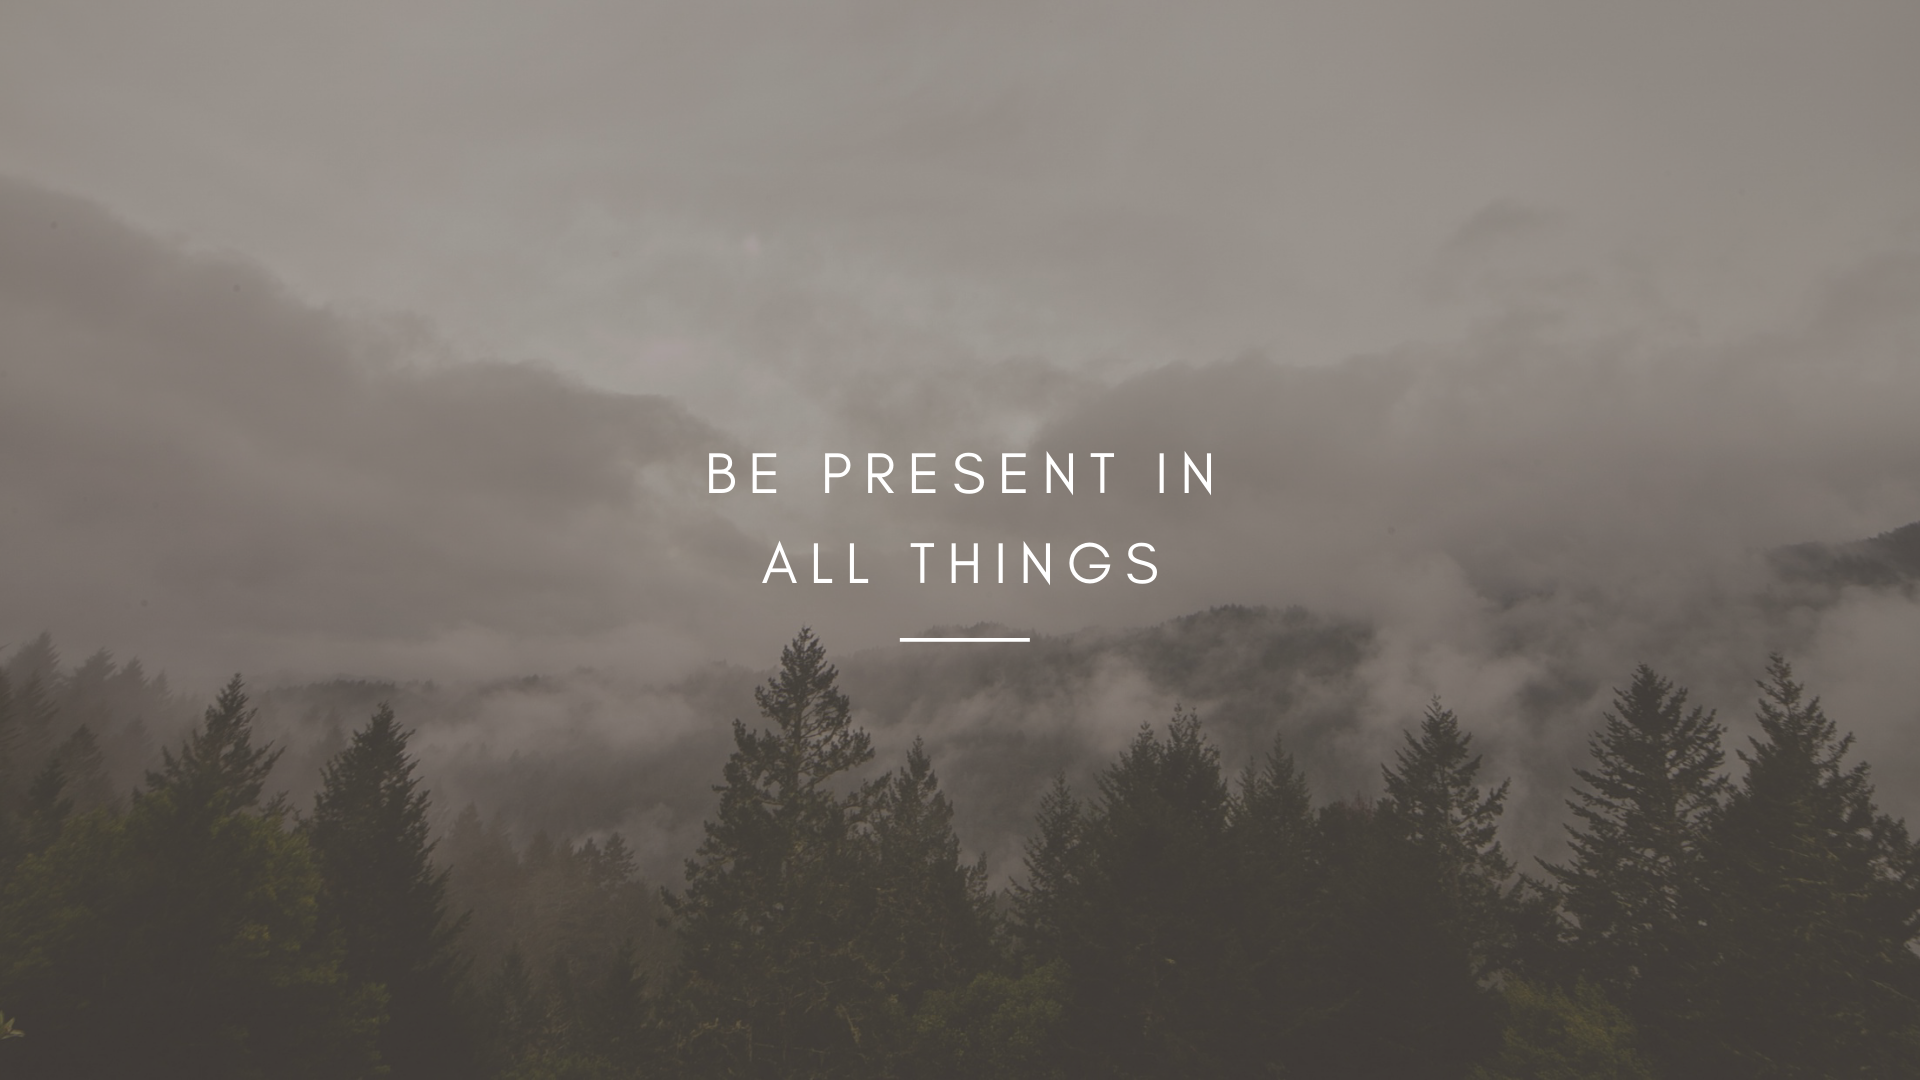 Be present in all things